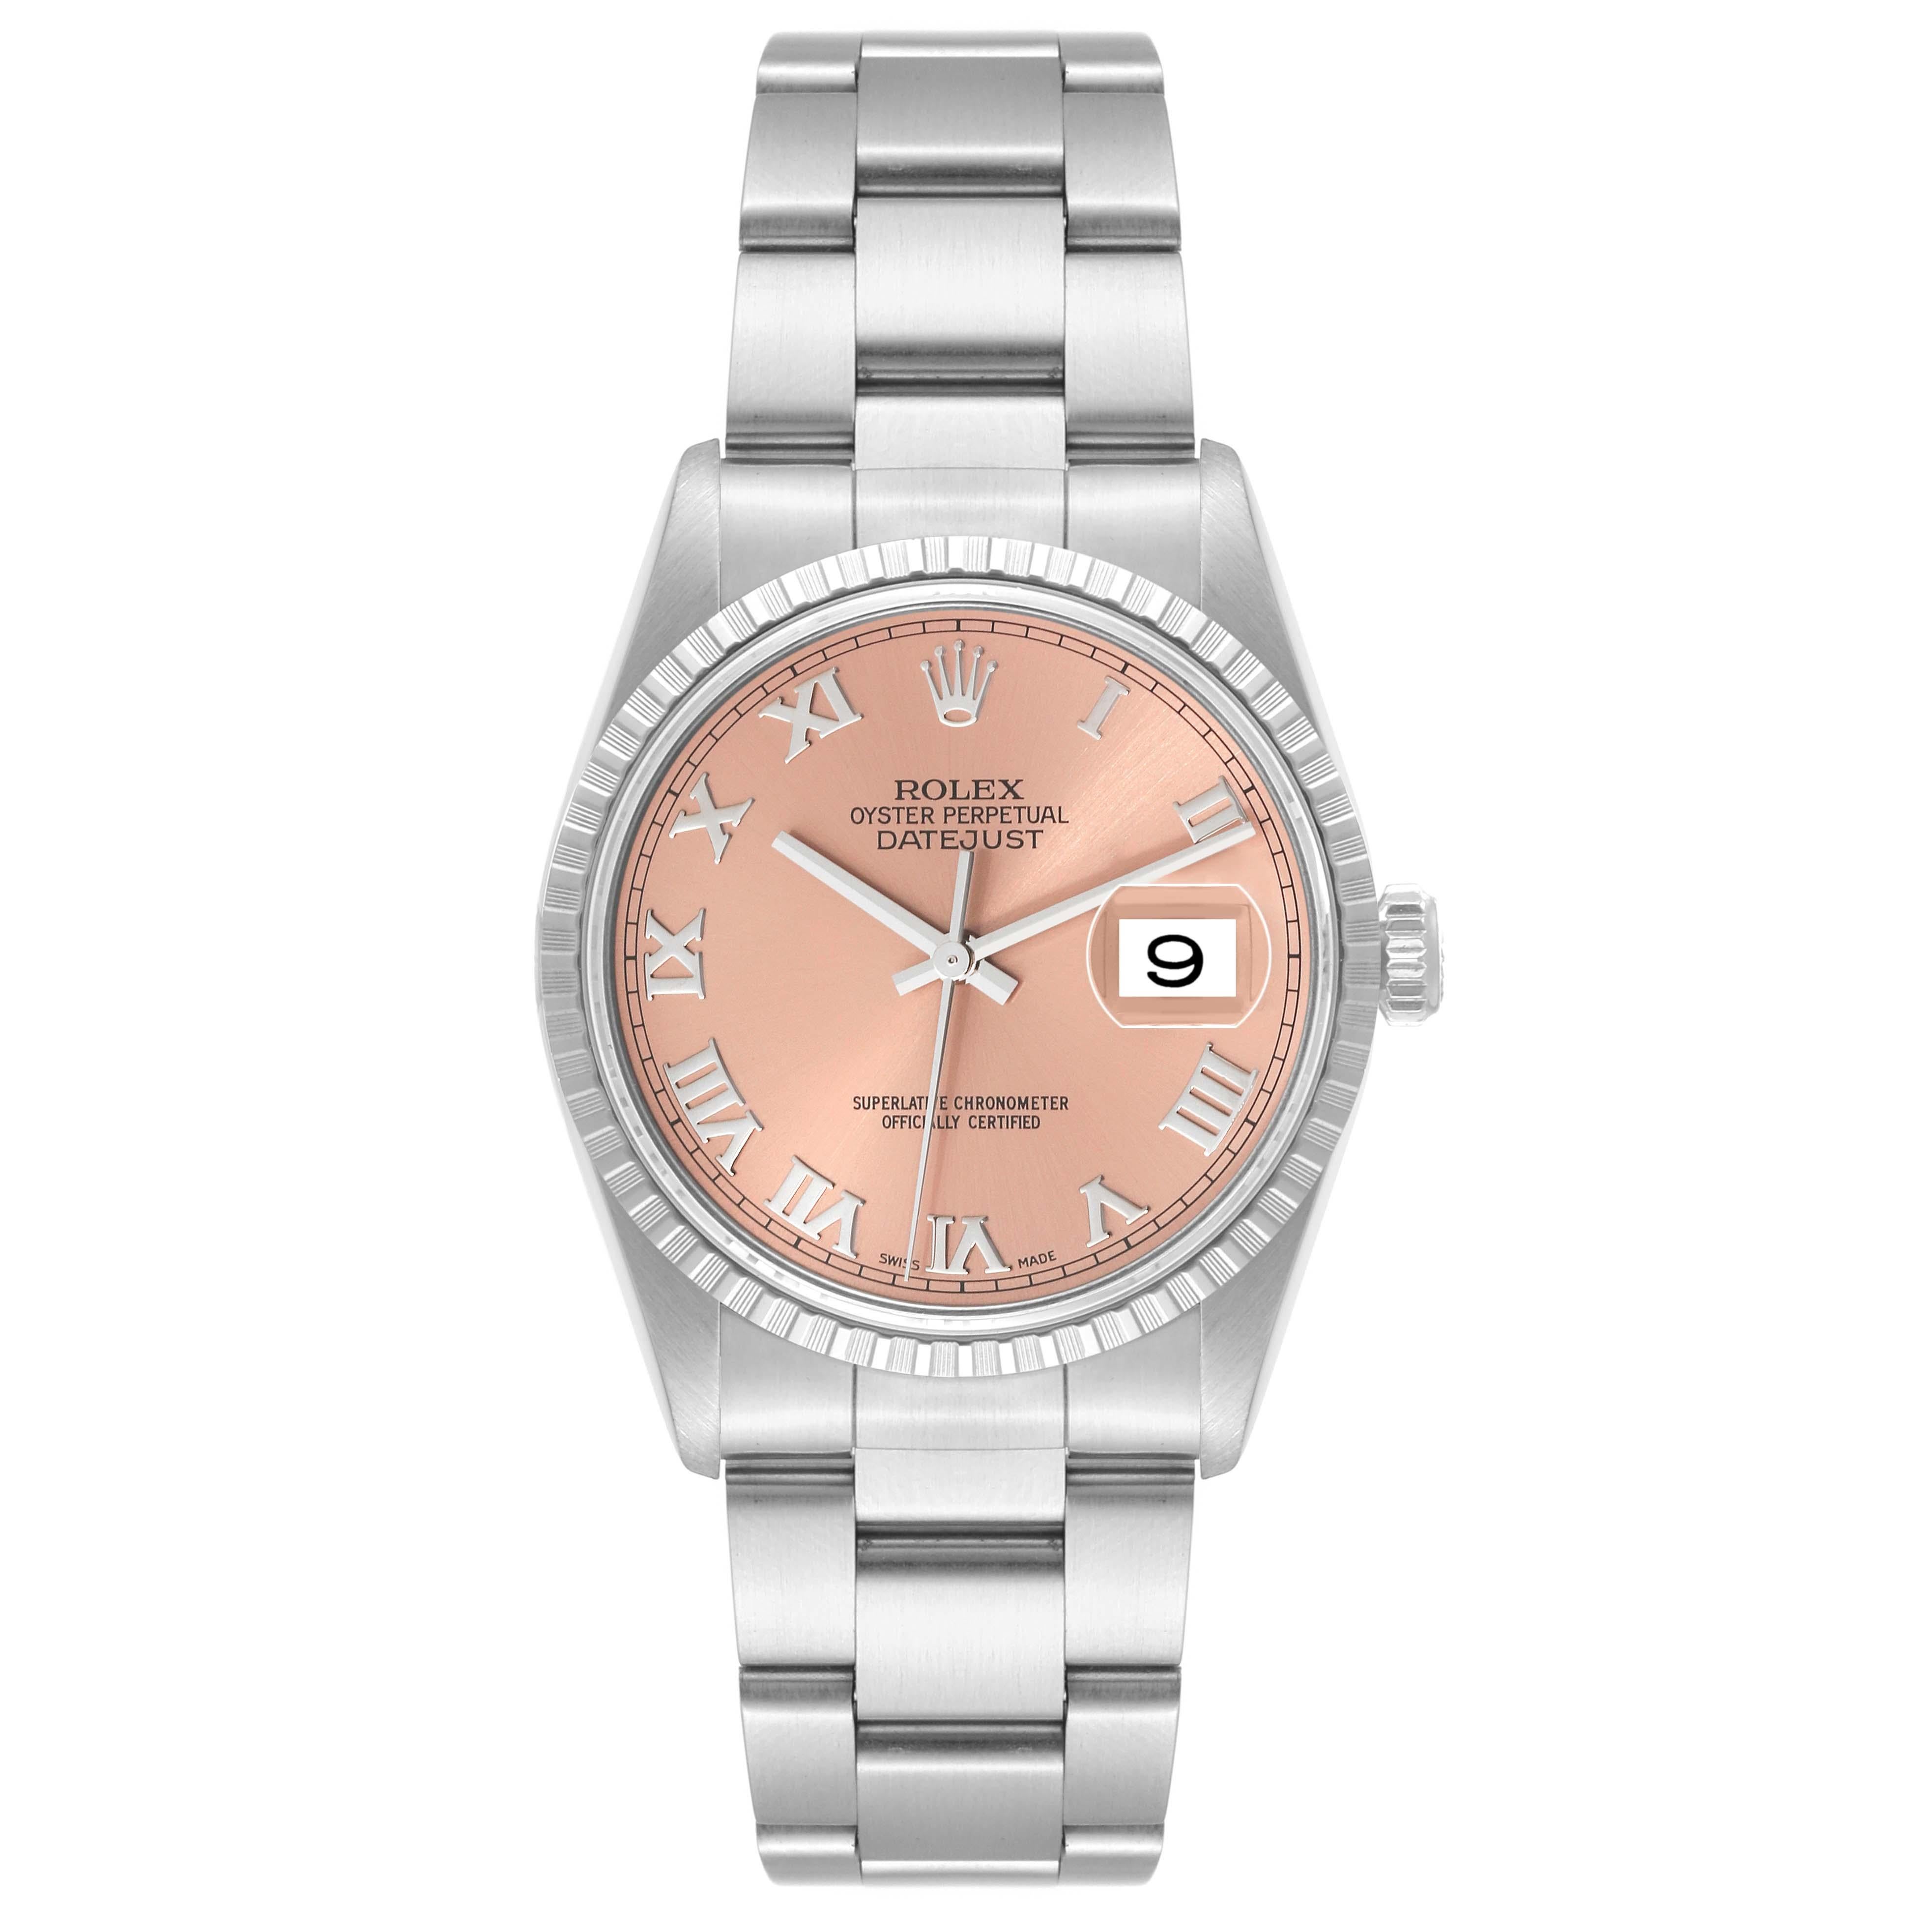 Rolex Datejust 36 Salmon Roman Dial Steel Mens Watch 16220 Box Papers. Officially certified chronometer automatic self-winding movement. Stainless steel oyster case 36 mm in diameter. Rolex logo on a crown. Stainless steel engine turned bezel.